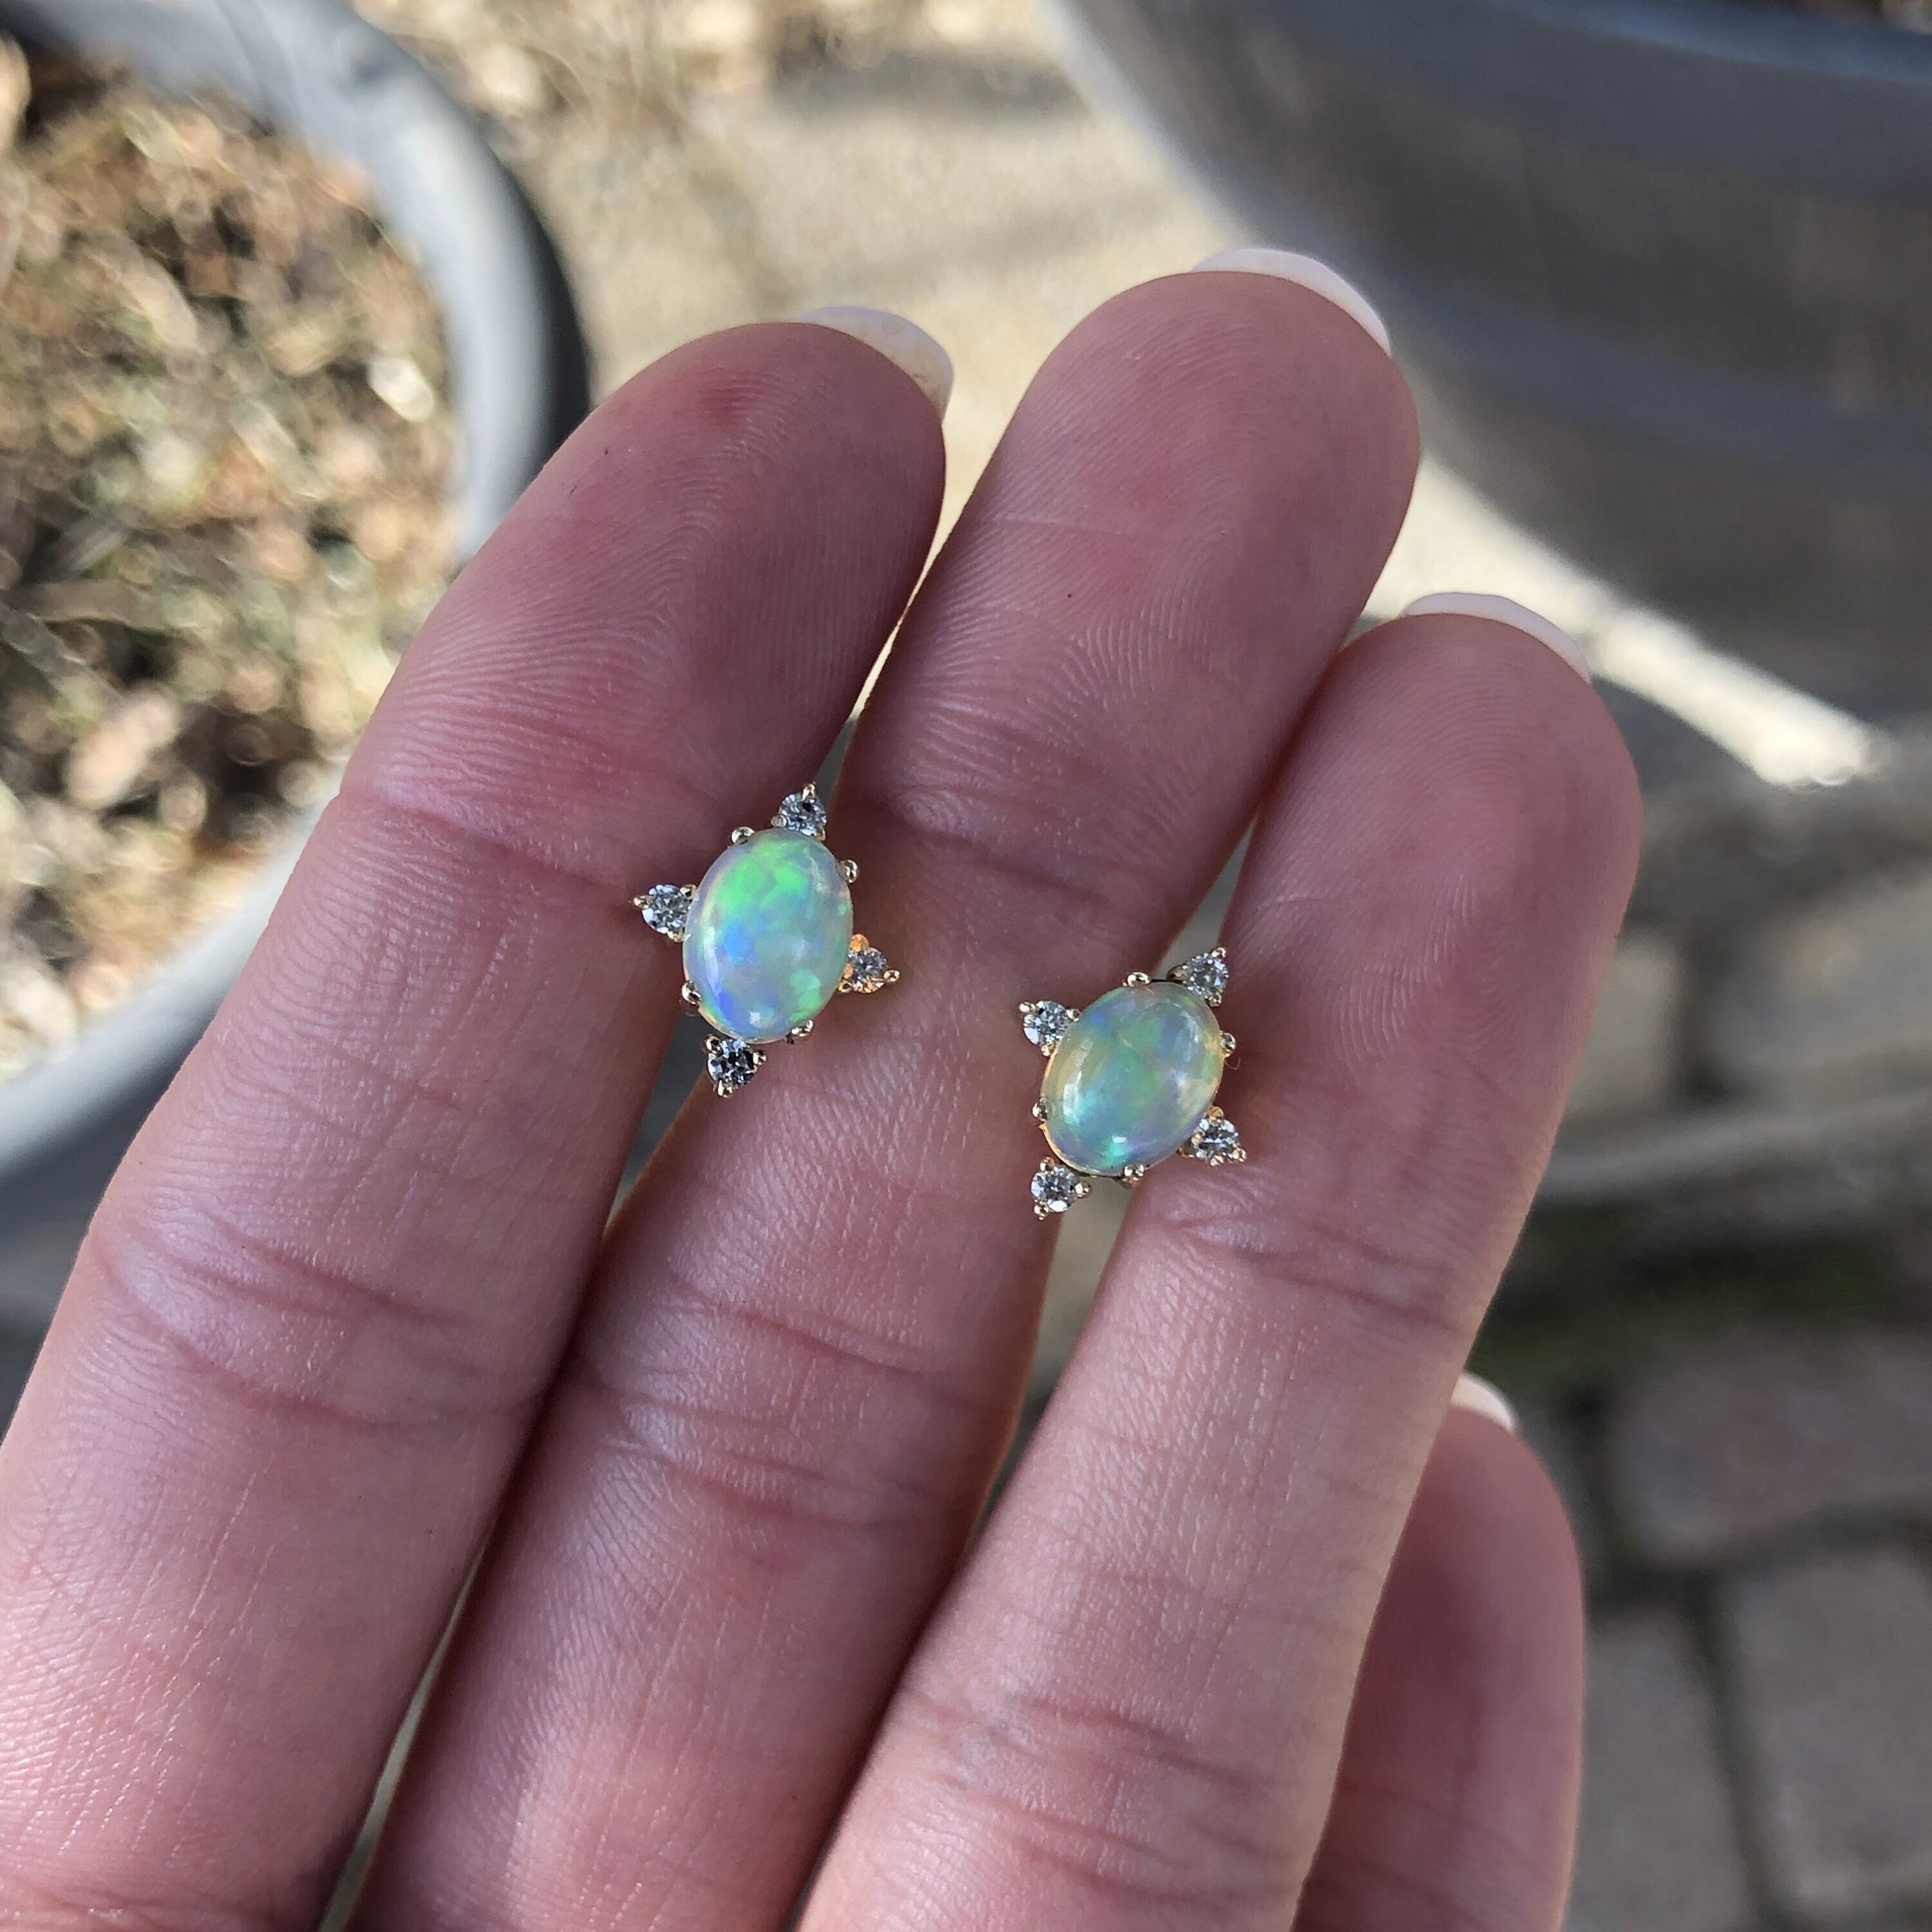 Natural Ethiopian Opal Stud Earrings in Solid 14k Gold w Natural Diamond Accents | Oval 8x6mm | Play of Color | October Birthstone